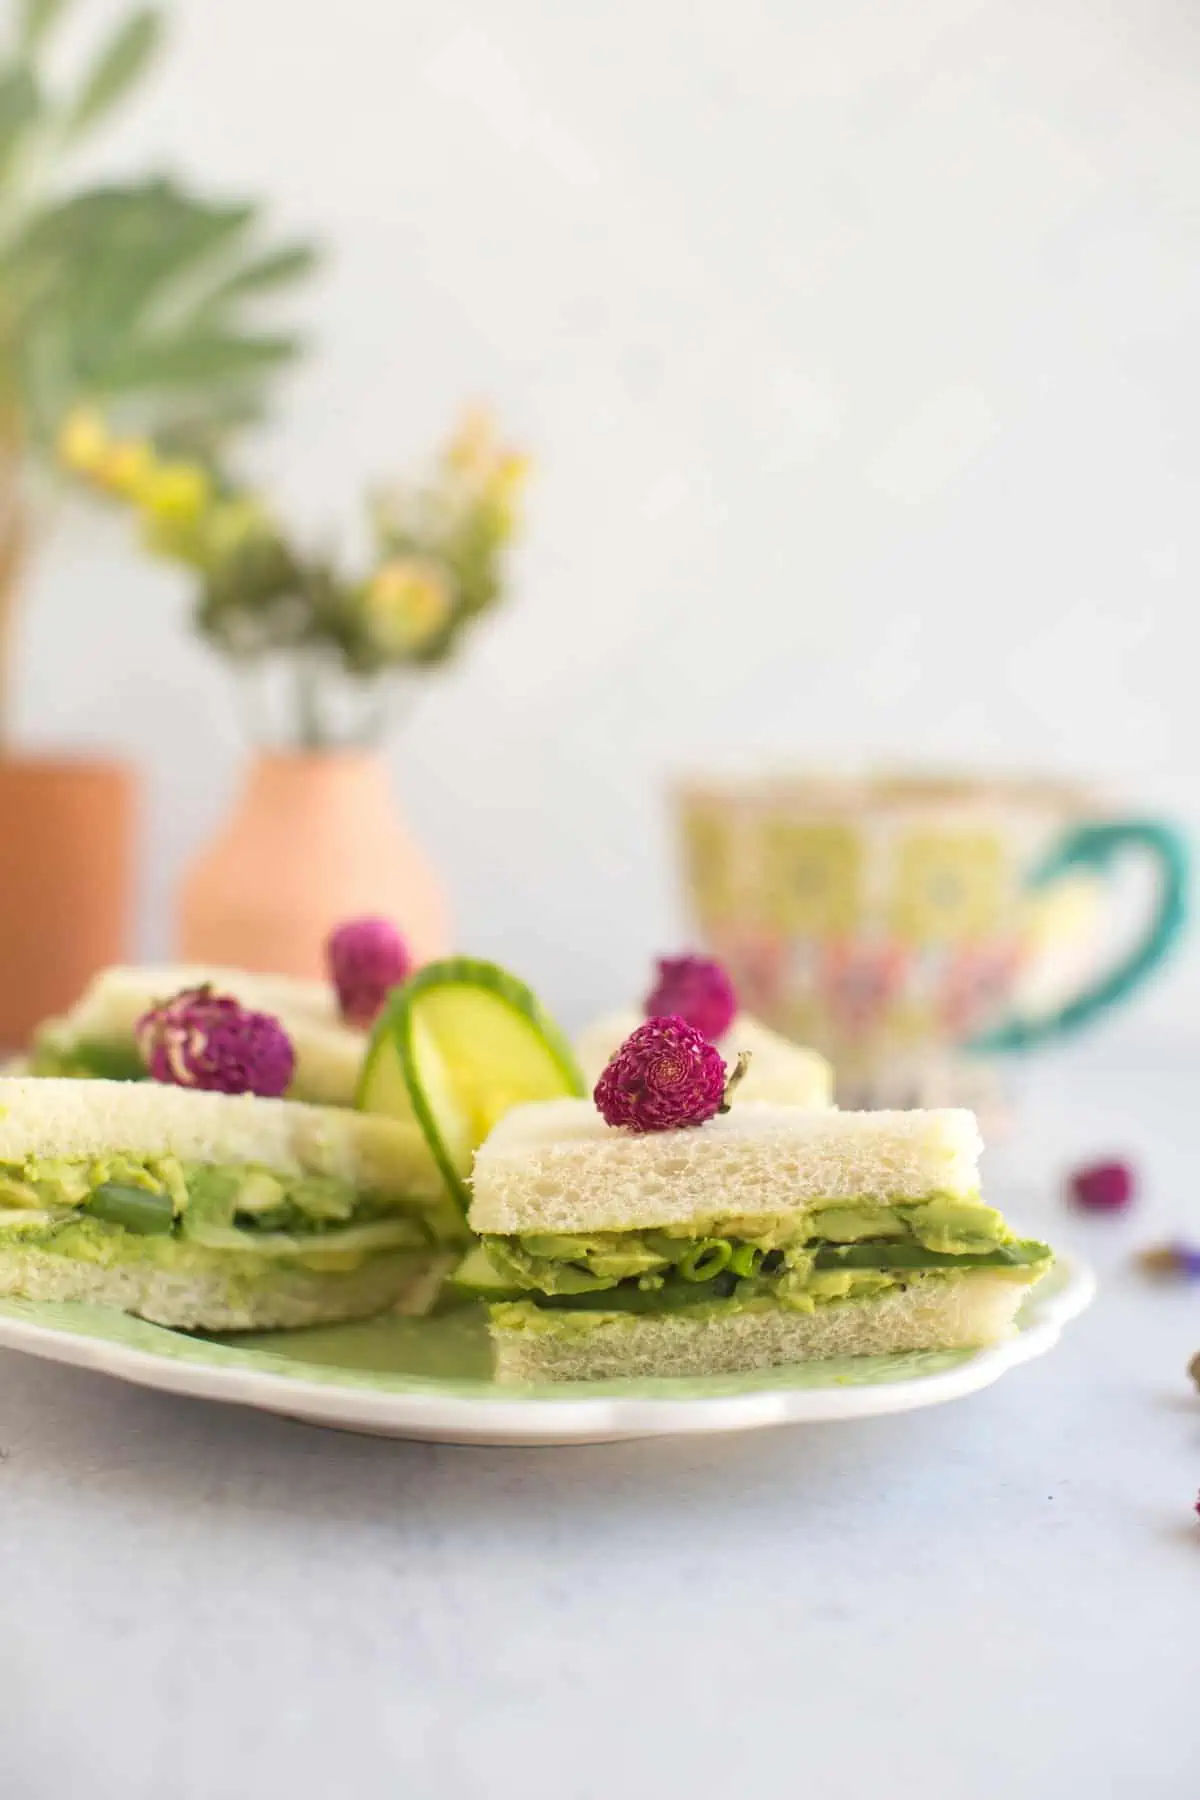 Side view of vegan afternoon tea sandwiches on a plate with a tea cup in the background.